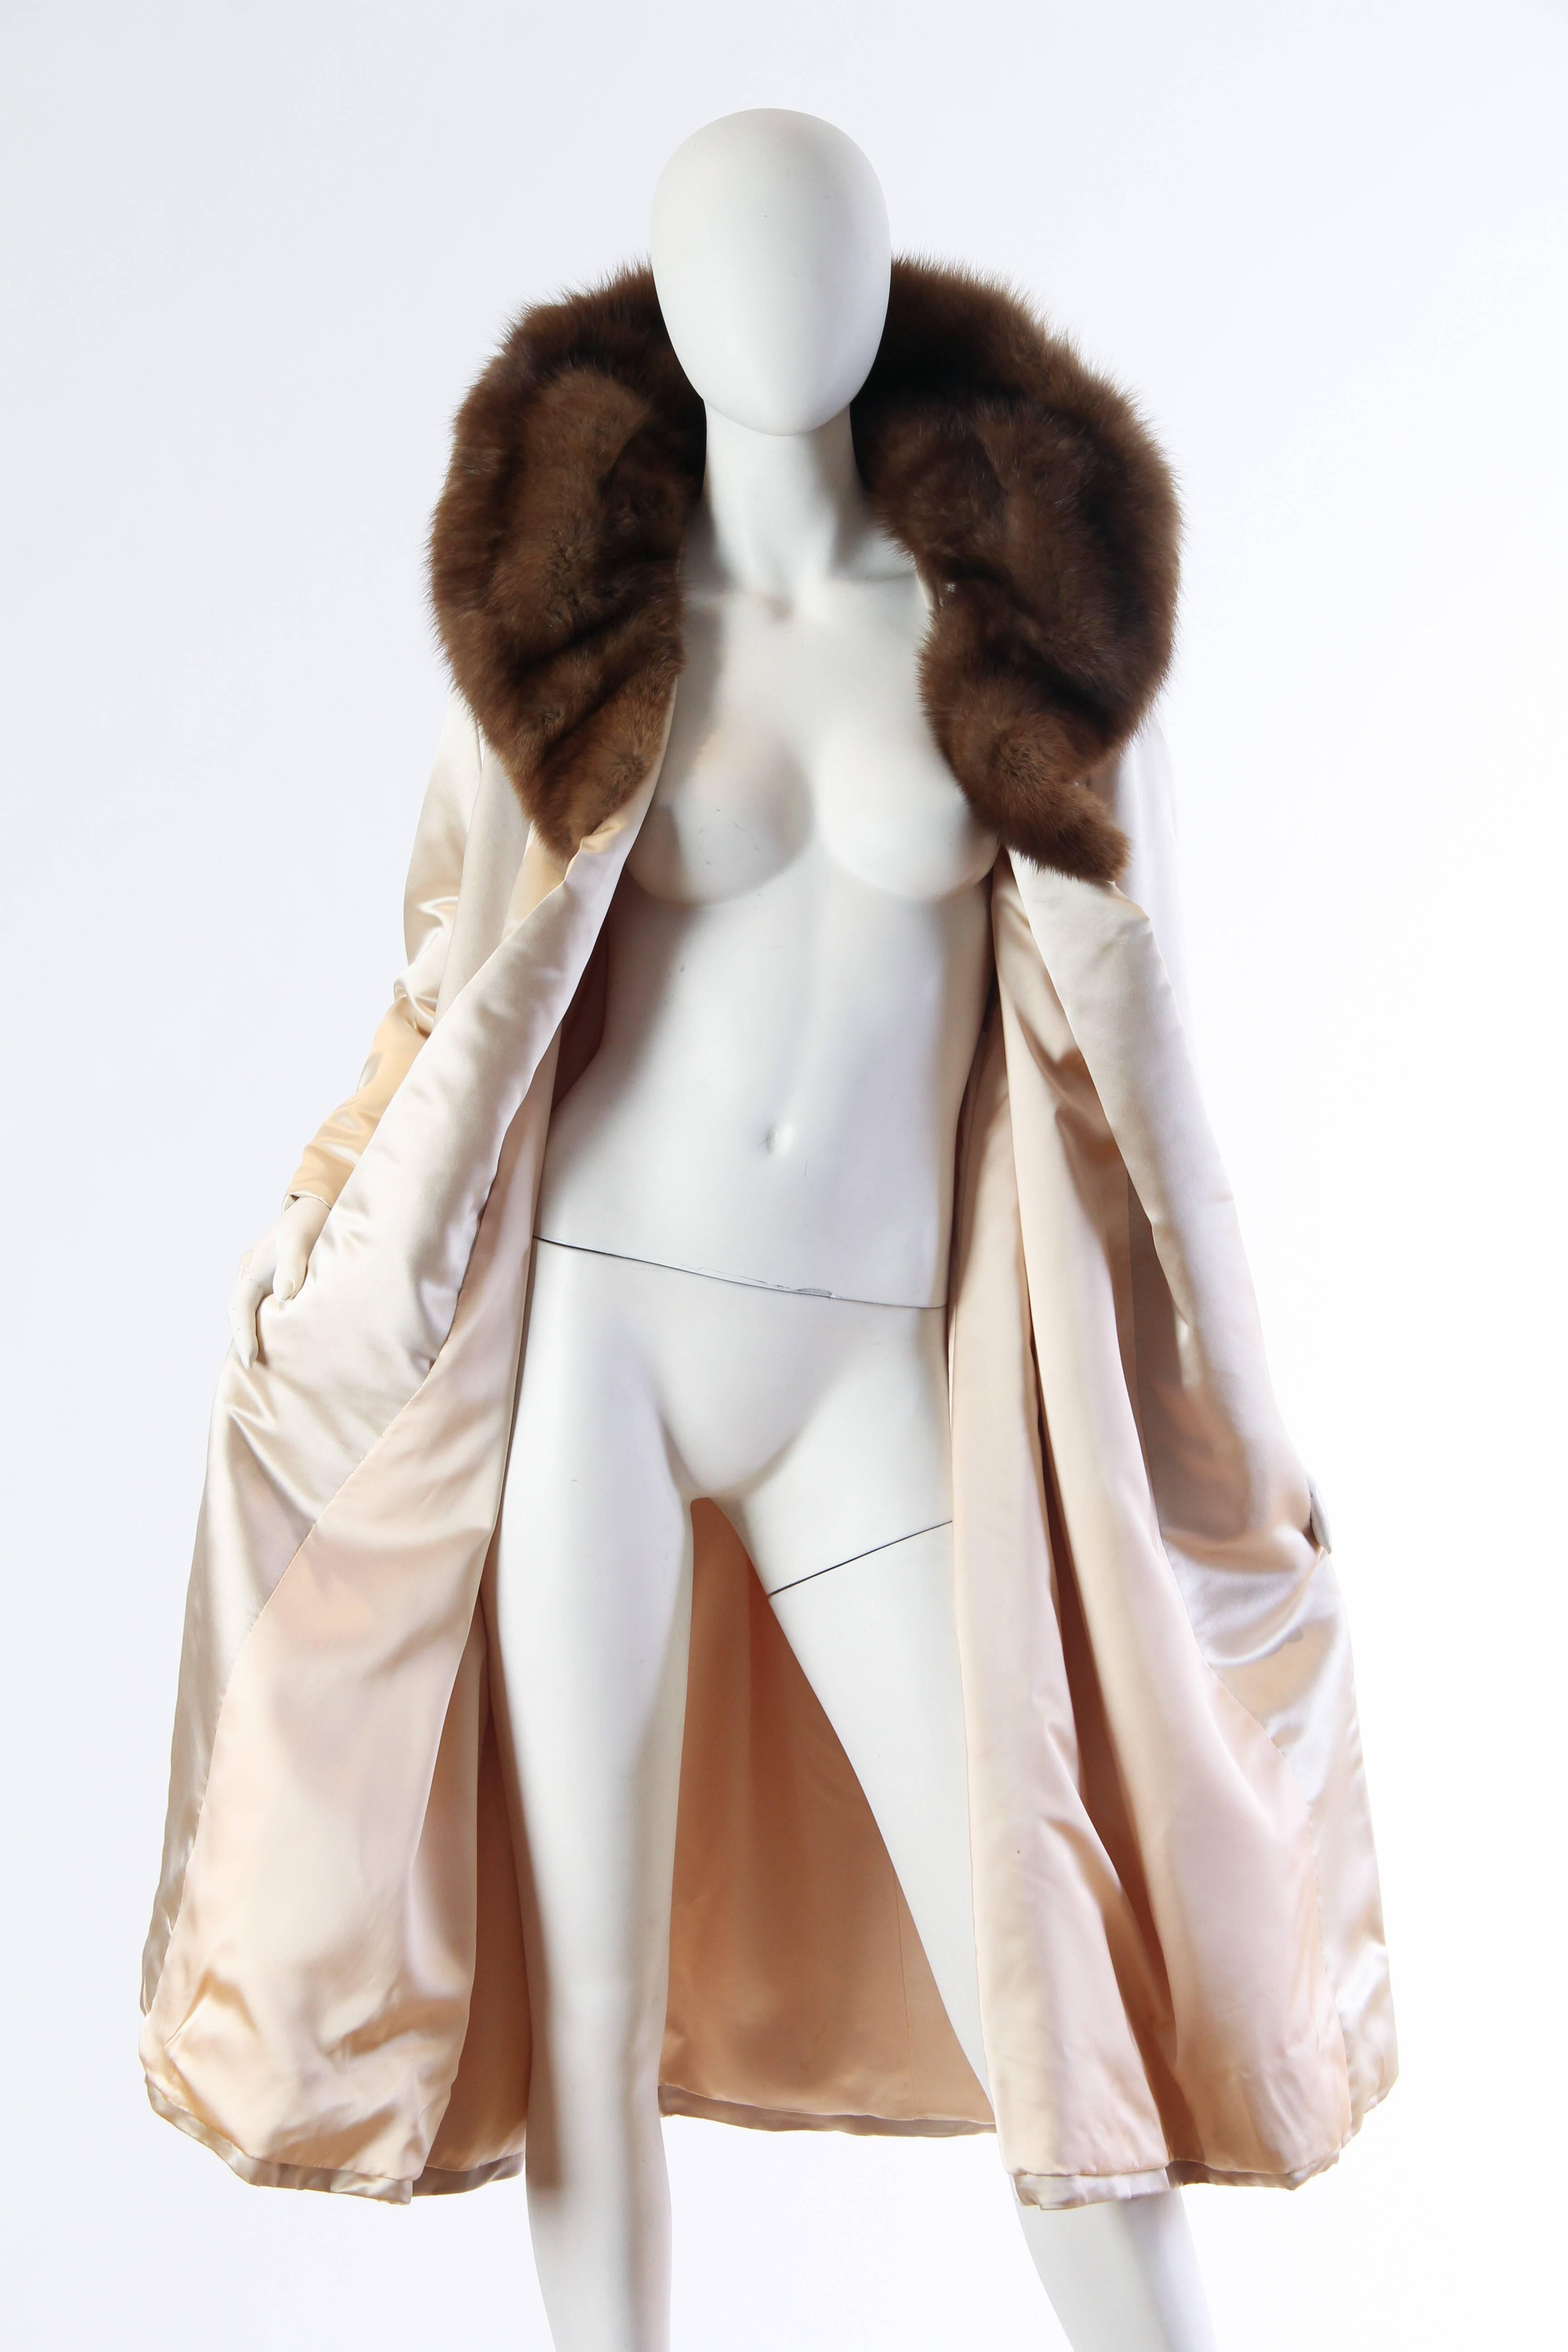 Luxuriously heavy duchess satin constructs this classic mid-century opera coat from New York retailer Bergdorf Goodman. A simple yet wonderful collar of sable frames the face and folds up for warmth. There is no closure as the coat is meant as a